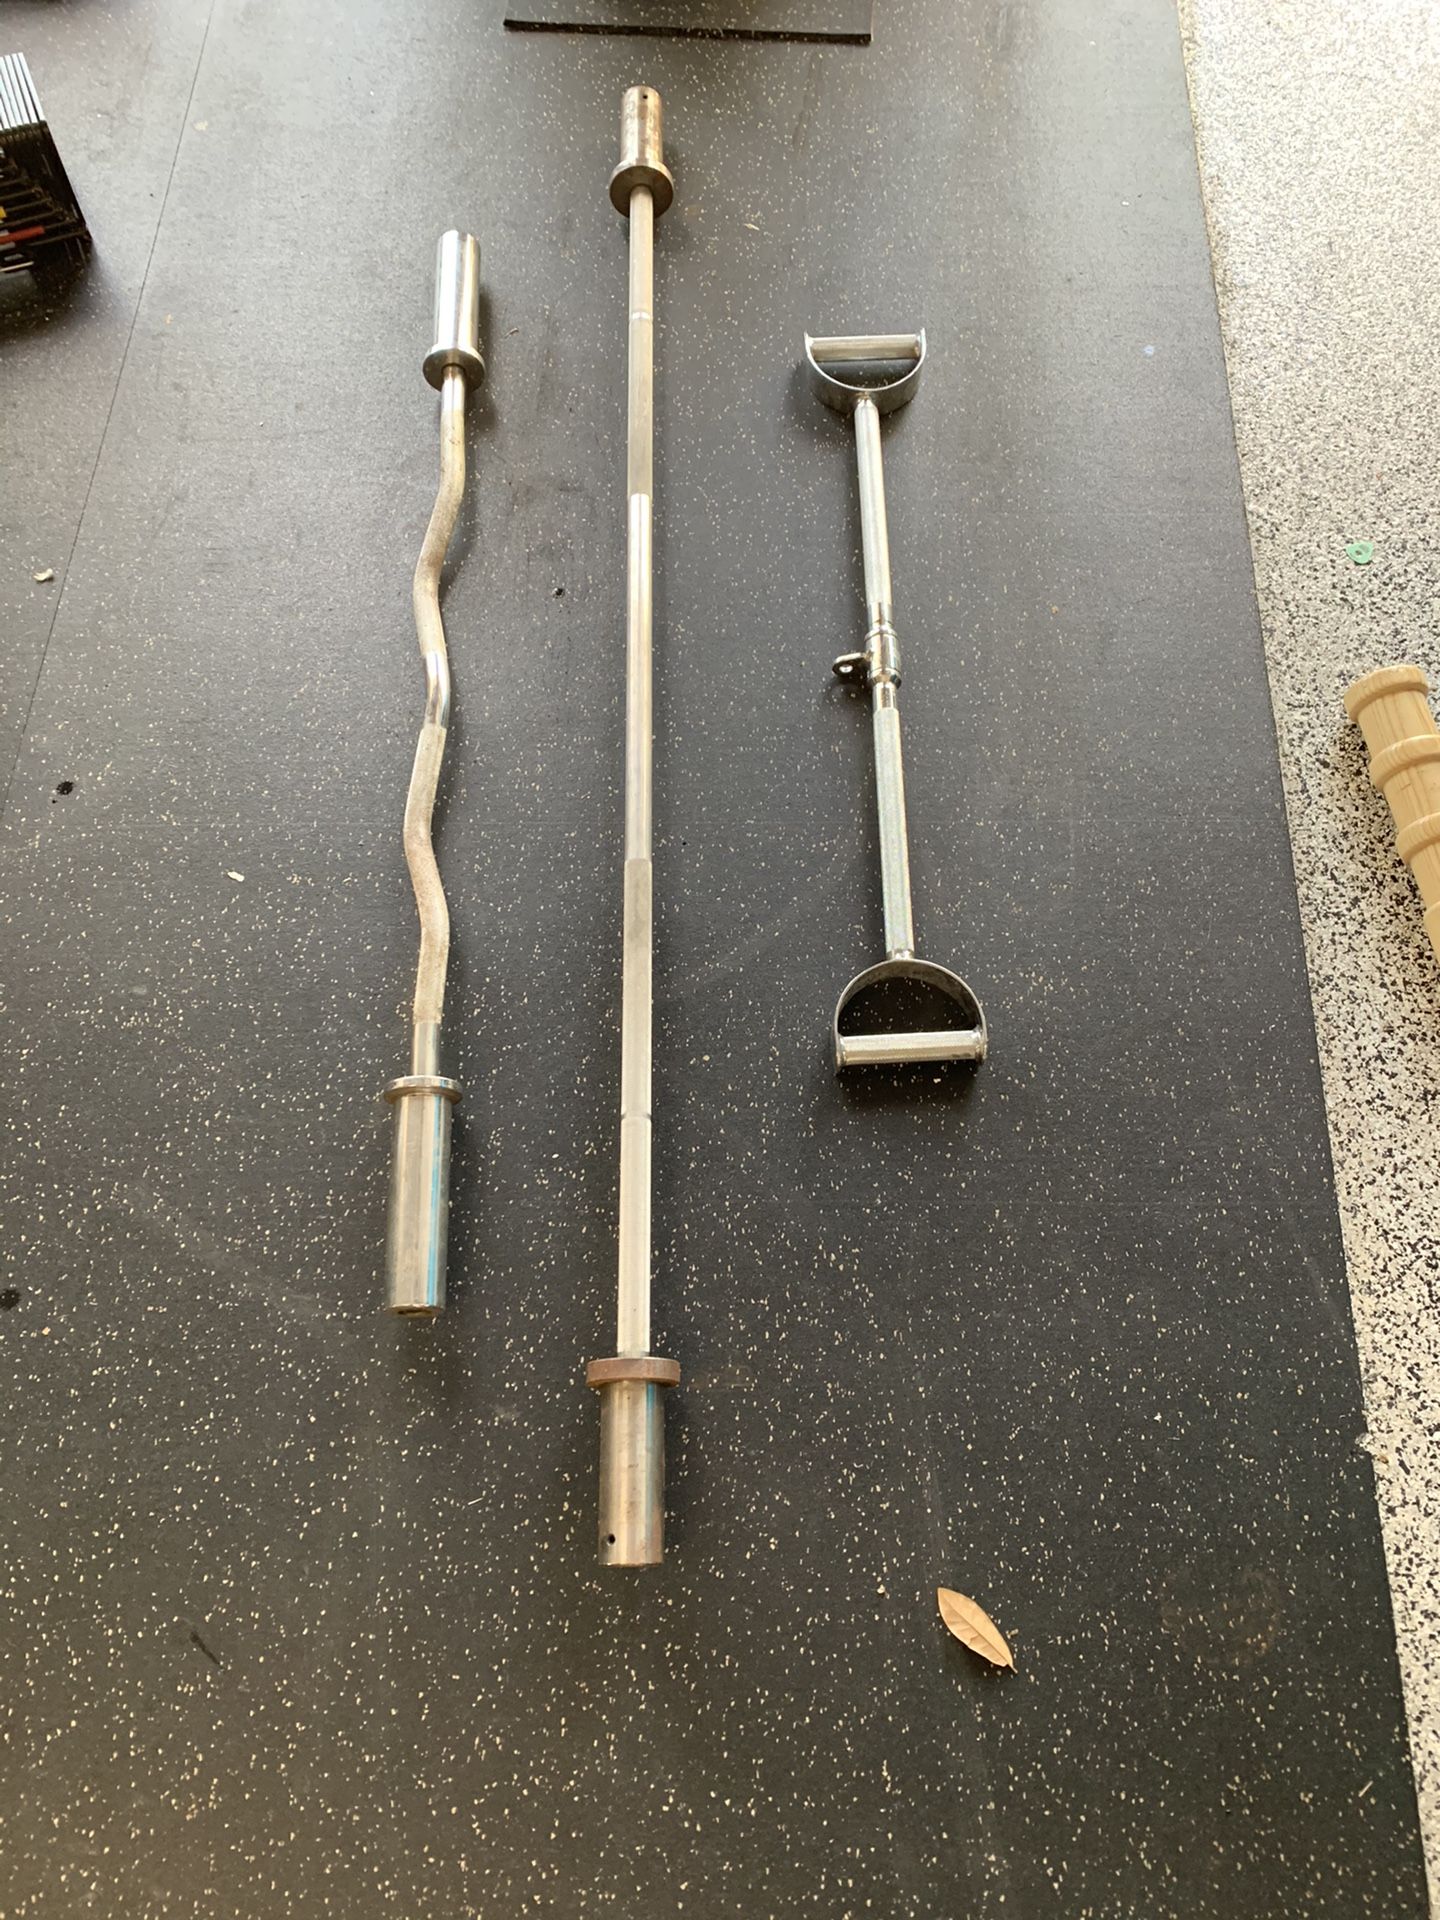 Various weightlifting bars for sale. Some light weight Rogue barbells too